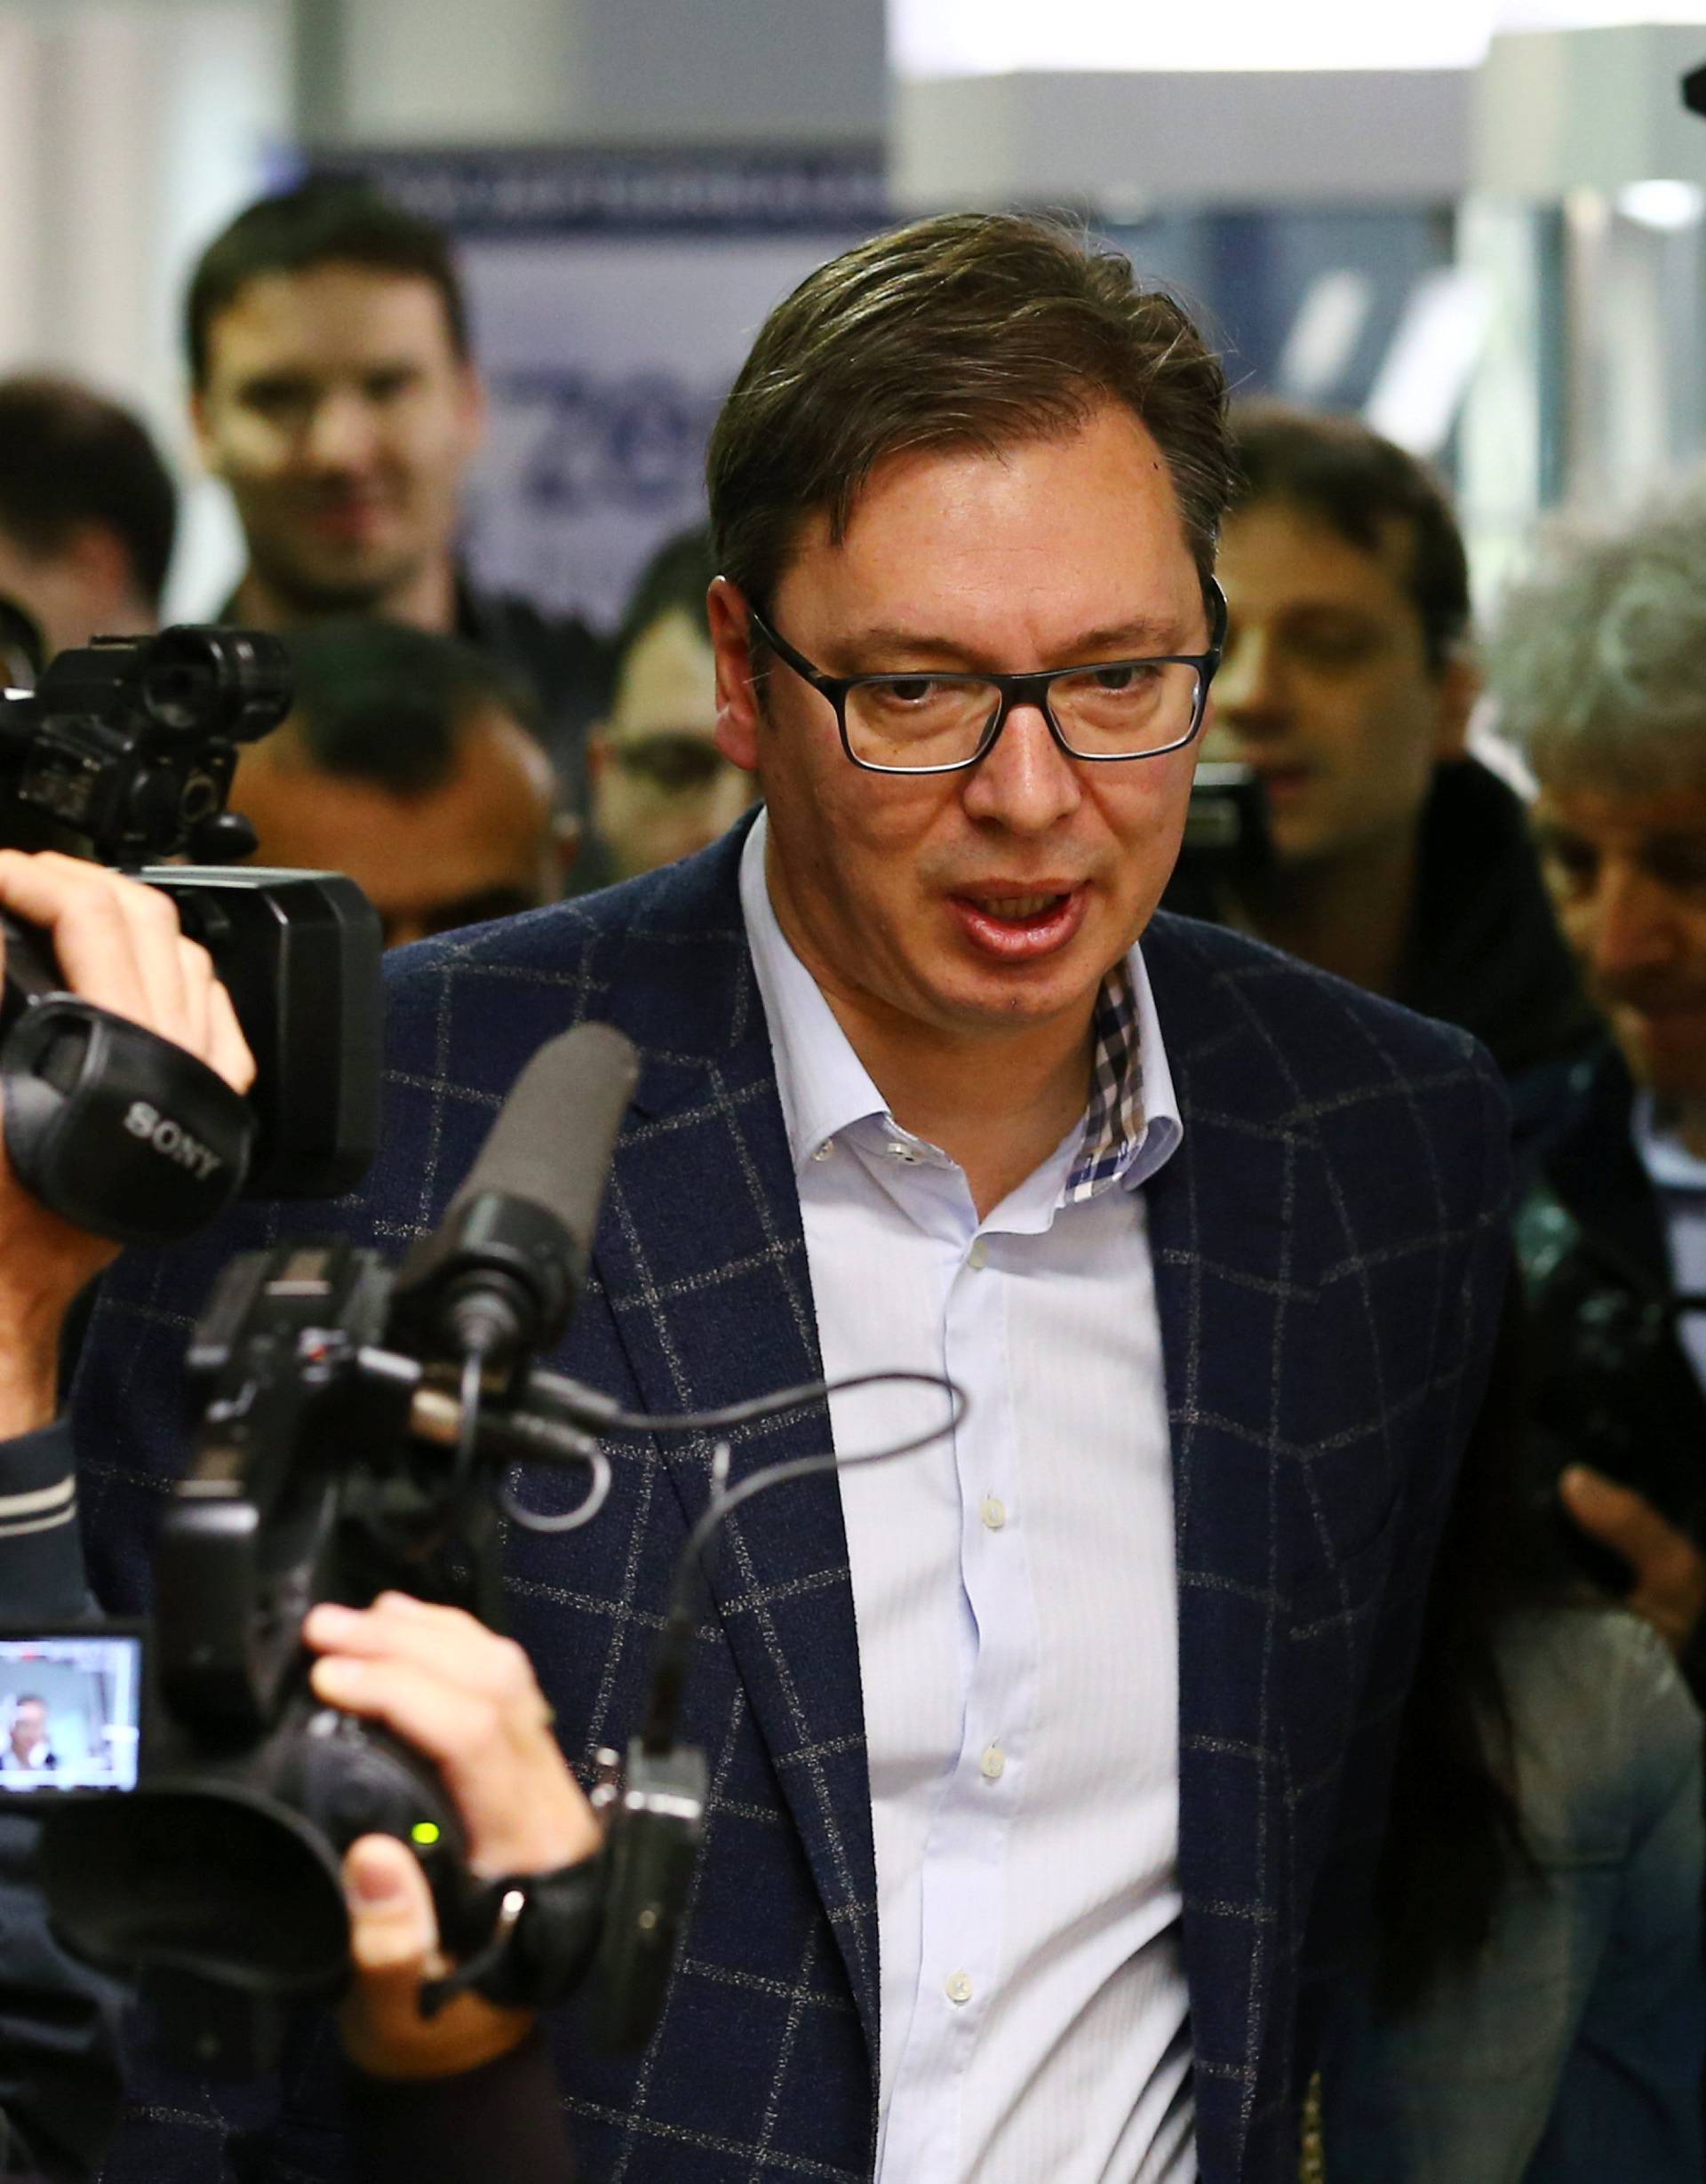 Serbian Prime Minister and presidential candidate Aleksandar Vucic arrives at a polling station during the presidential election in Belgrade